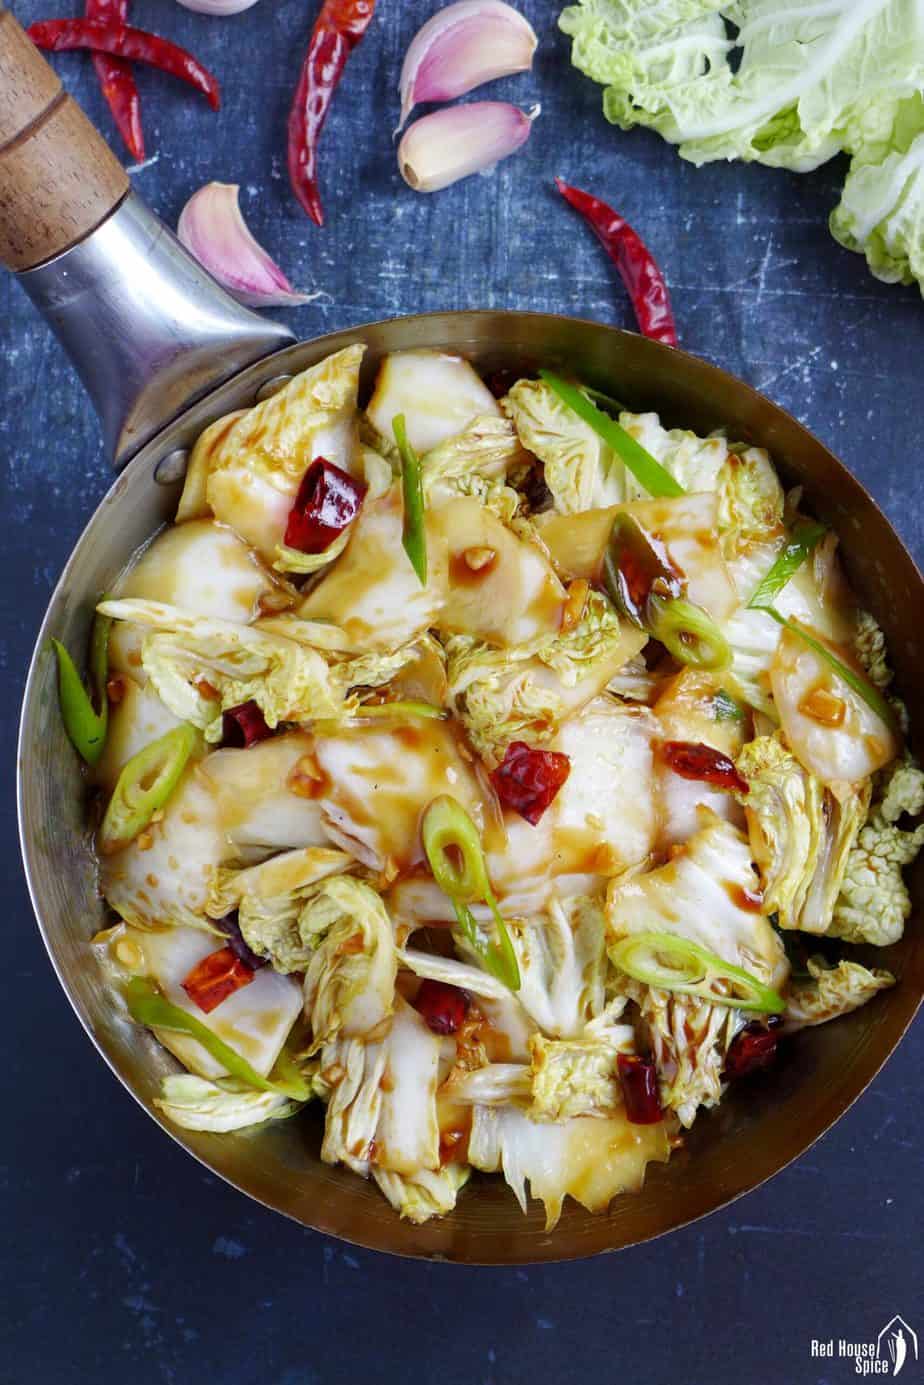 Hot & sour napa cabbage stir-fry in a wok